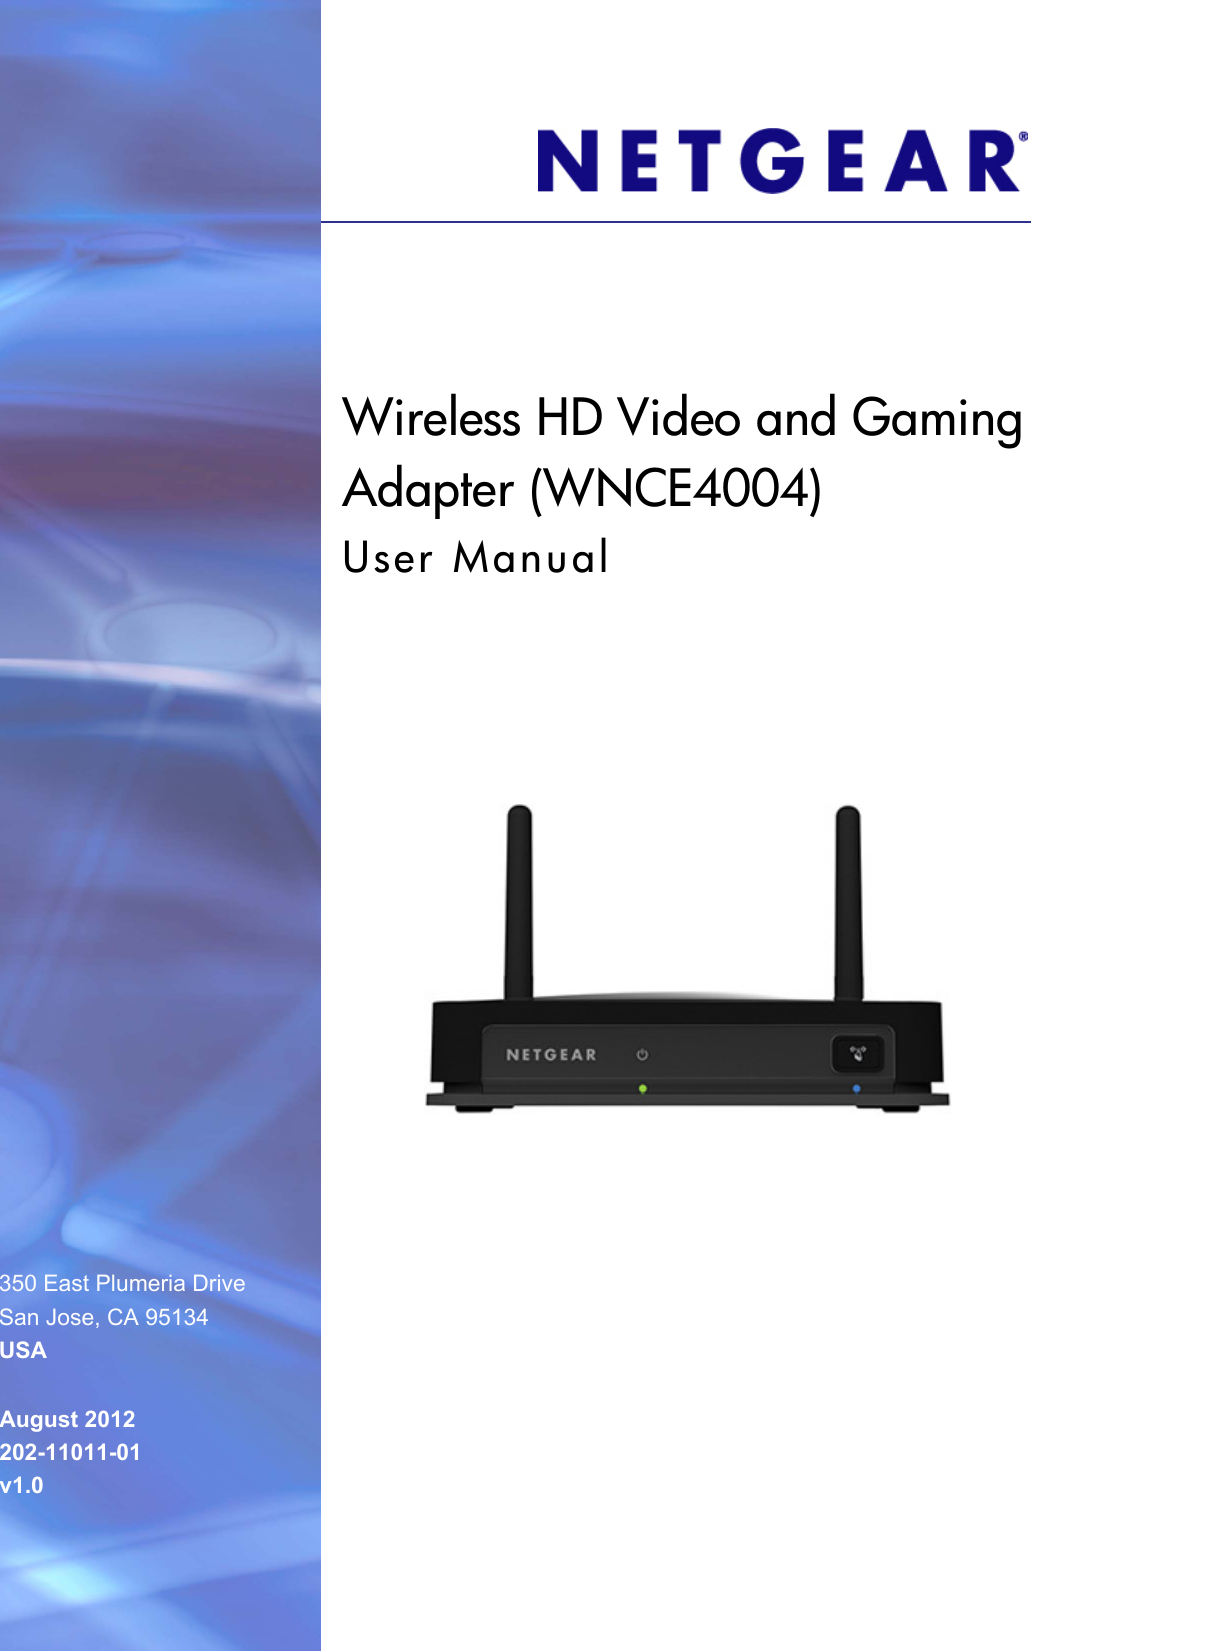 350 East Plumeria DriveSan Jose, CA 95134USAAugust 2012202-11011-01v1.0Wireless HD Video and Gaming Adapter (WNCE4004)User Manual